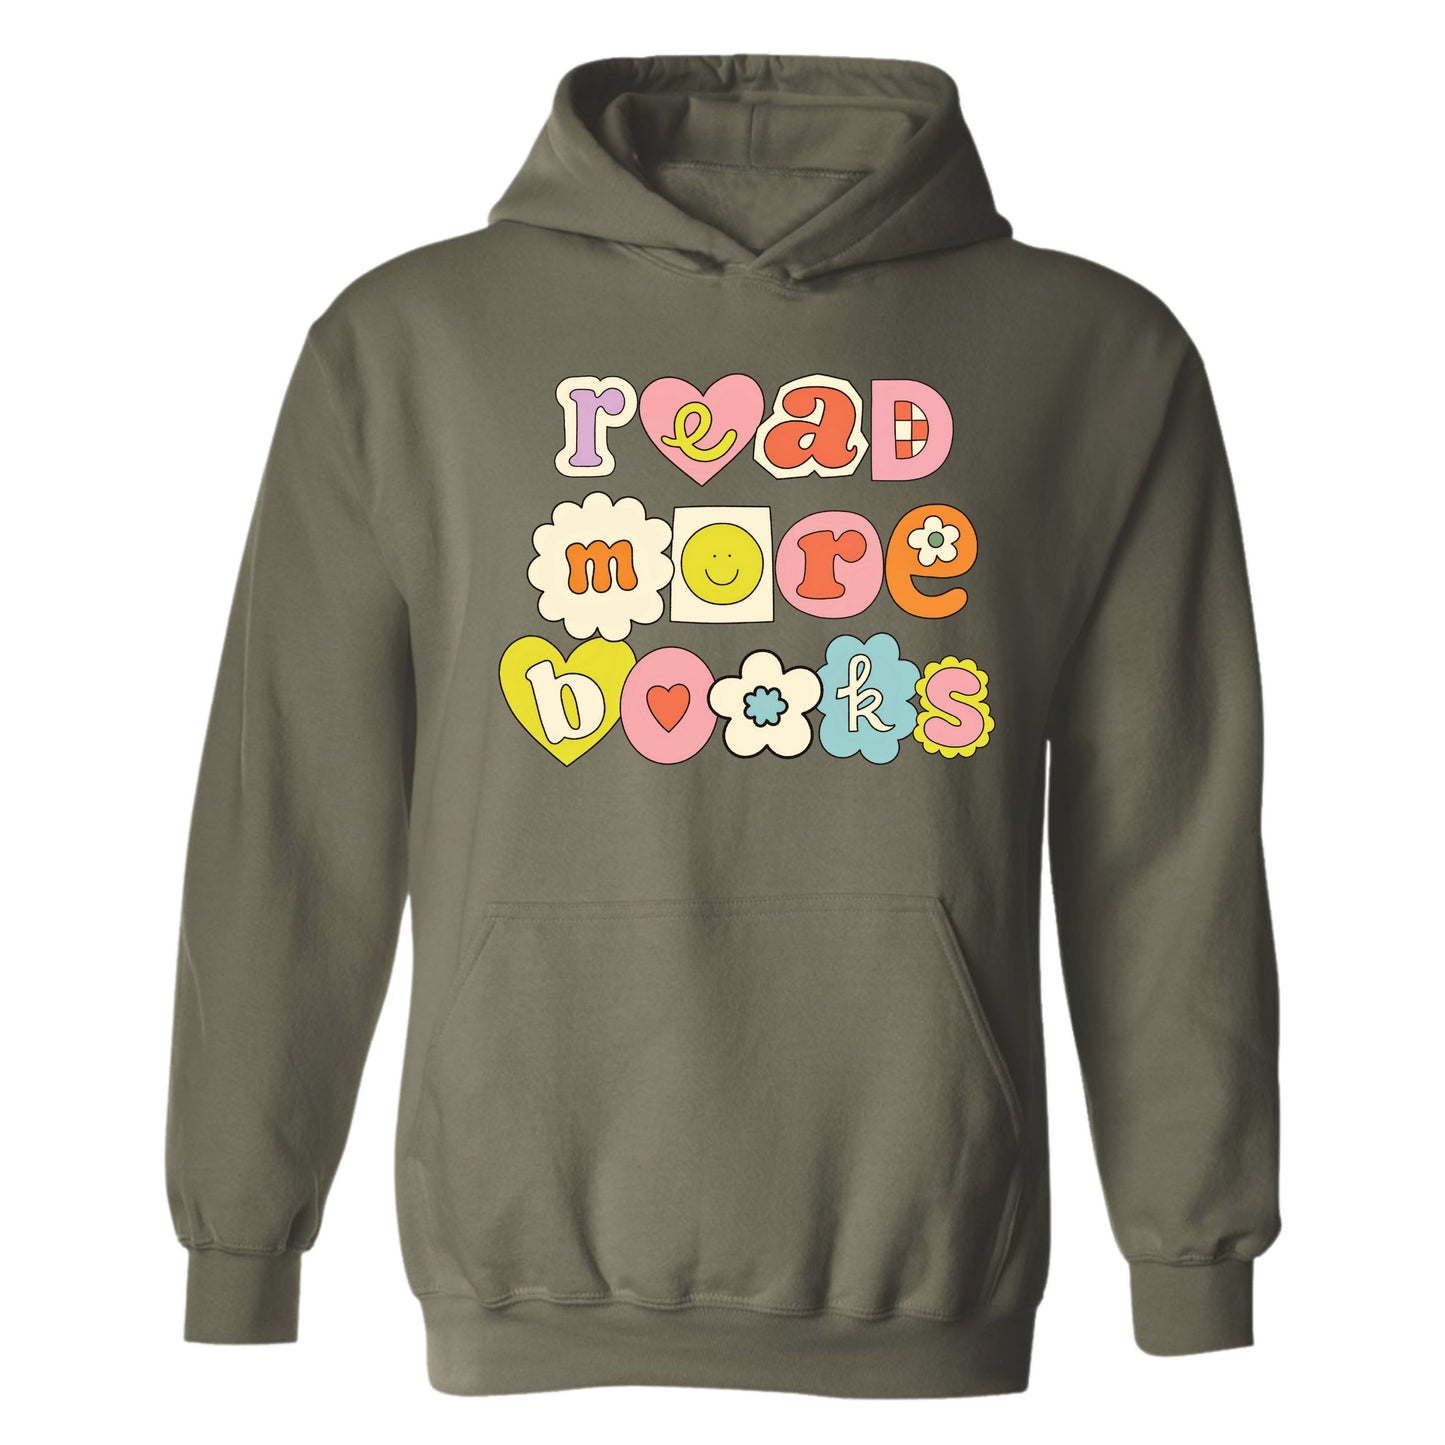 Gildan Adult Hoodie- Read More Books (Made To Order)